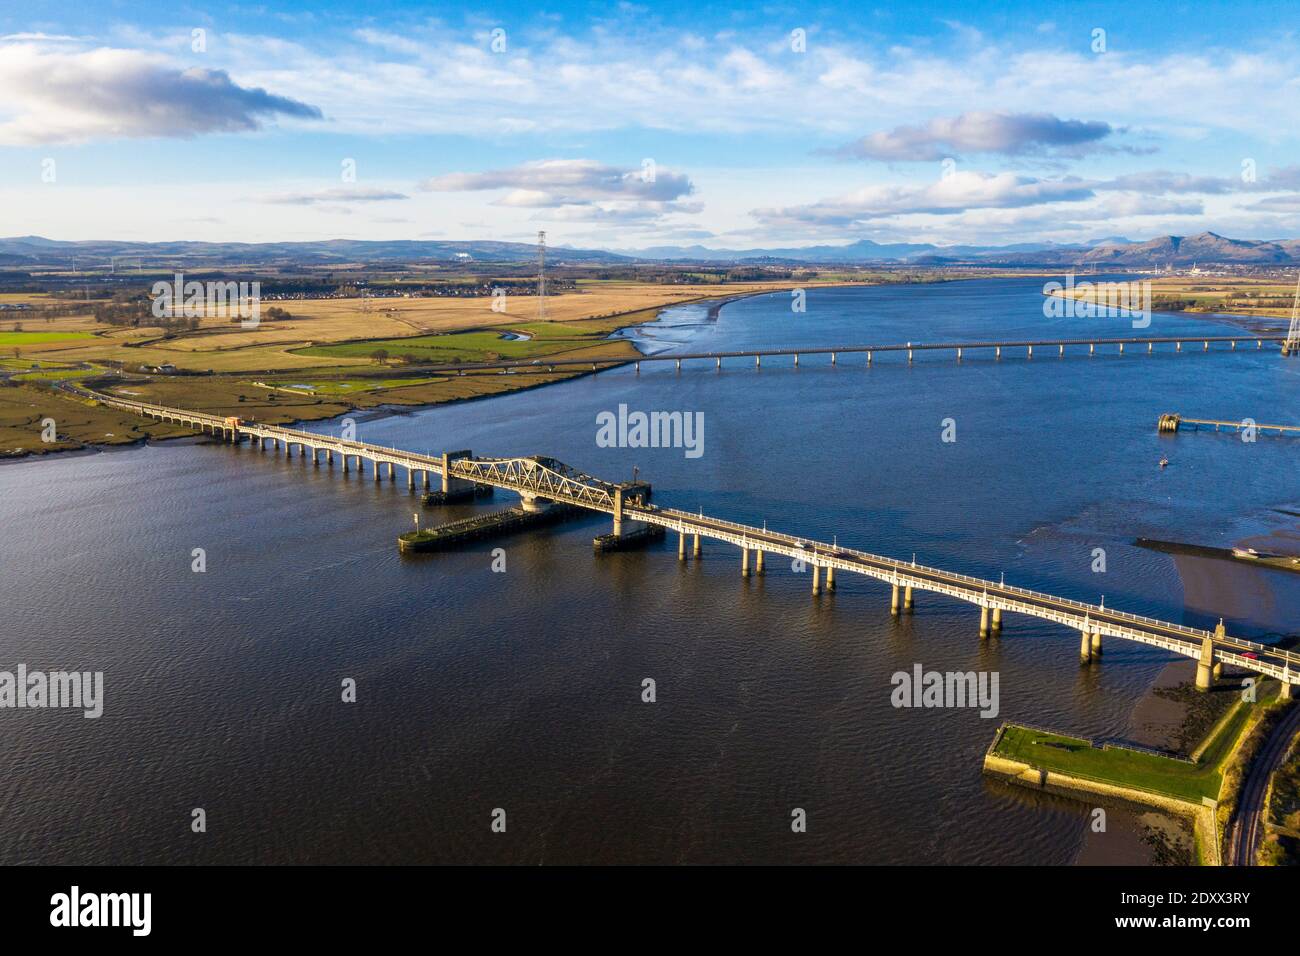 Aerial view of the Kincardine bridge and Clackmannanshire bridge spanning the  Firth of Forth at Kincardine-on-Forth, Scotland. Stock Photo